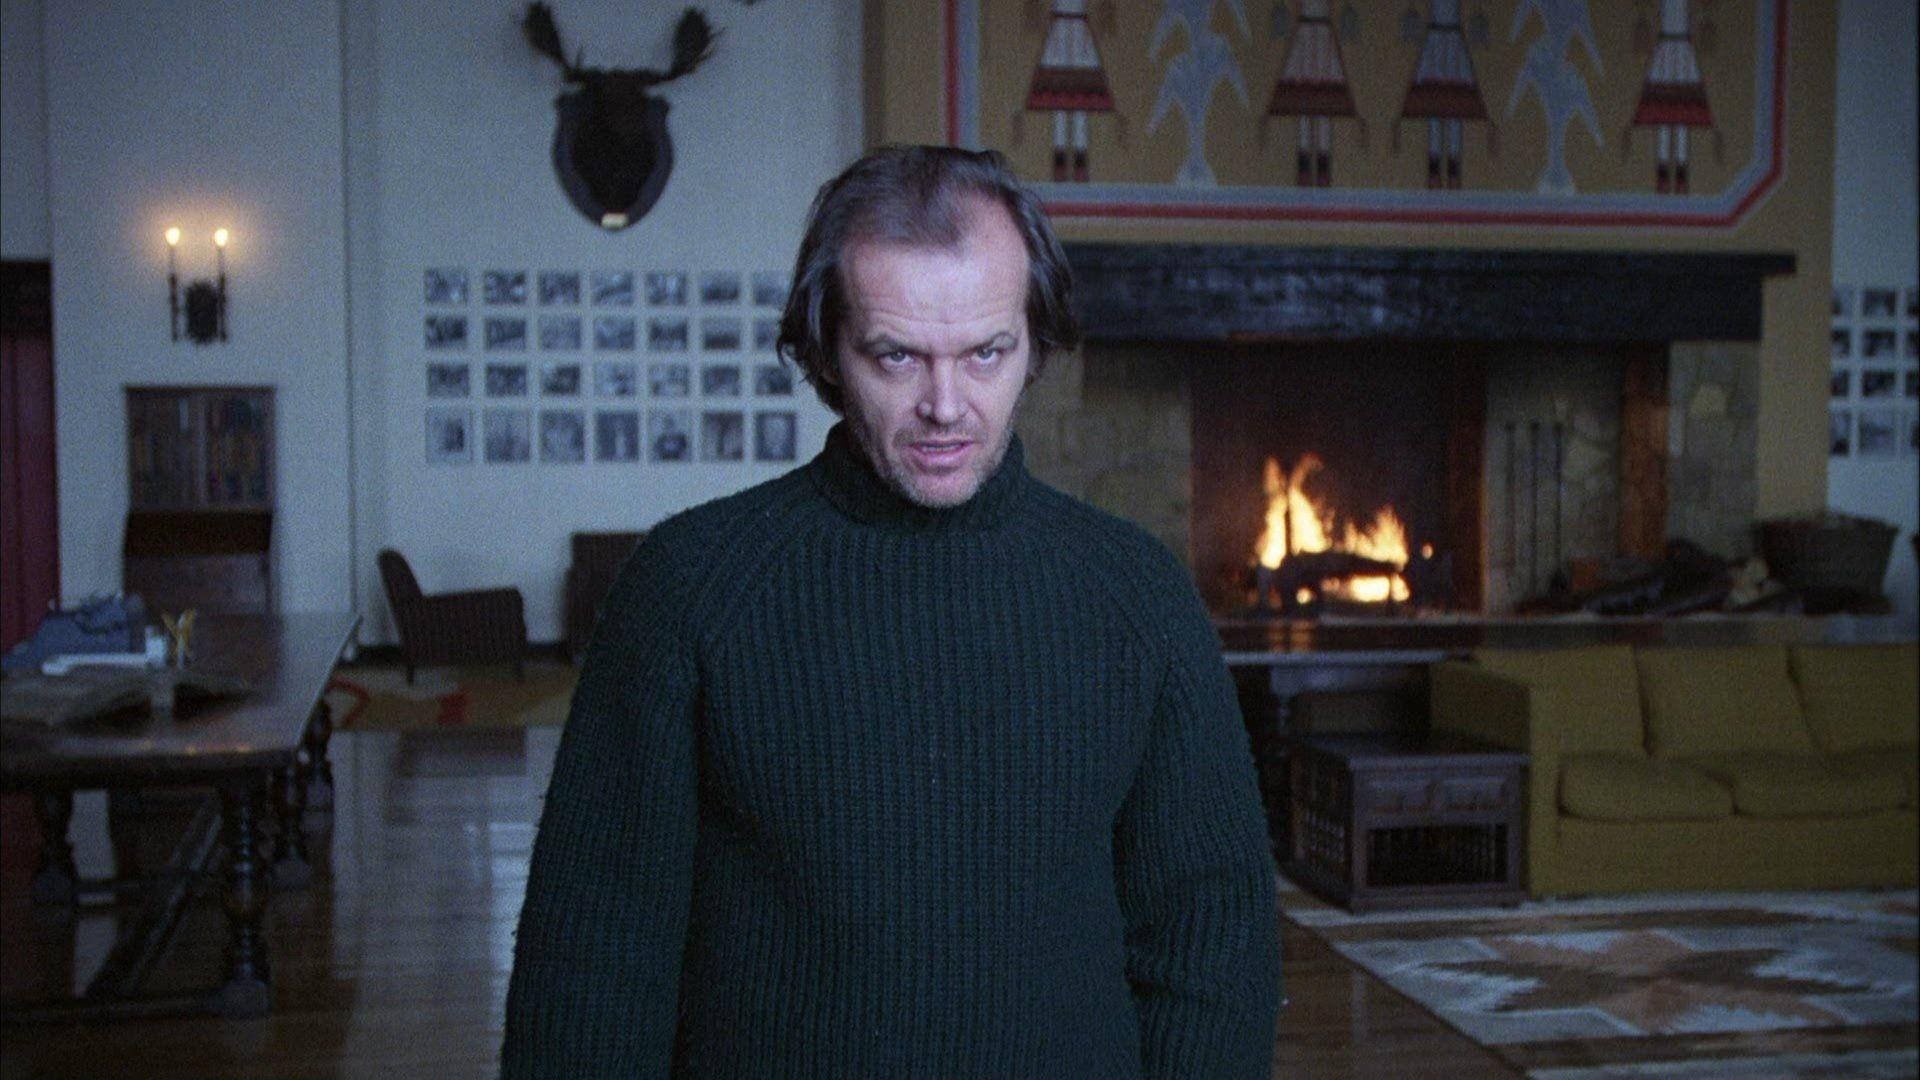 1920X1080 The Shining Wallpaper and Background